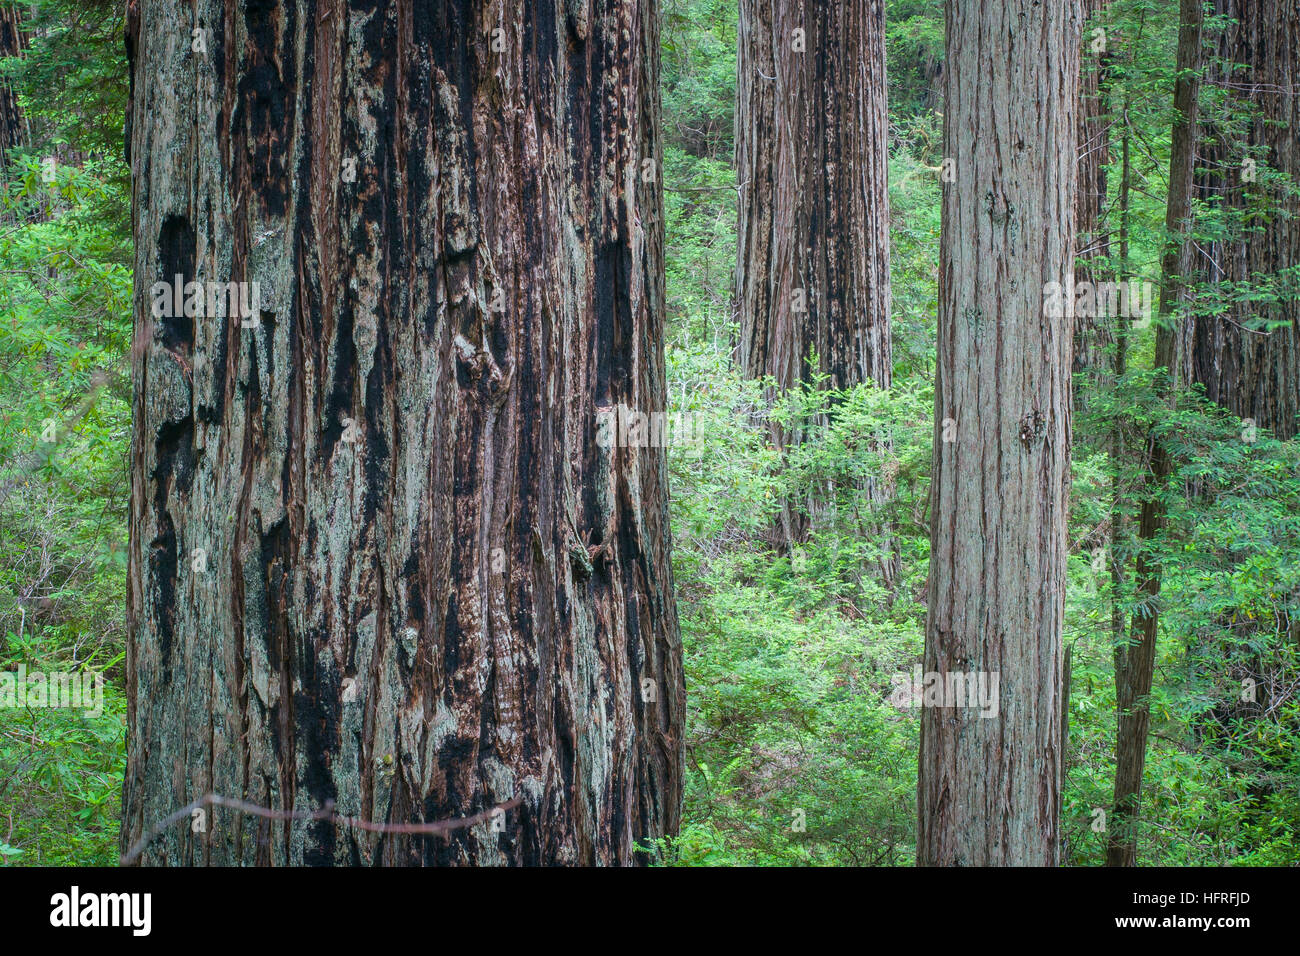 Old-growth California Redwood trees in Redwood National Park, California, USA. Stock Photo